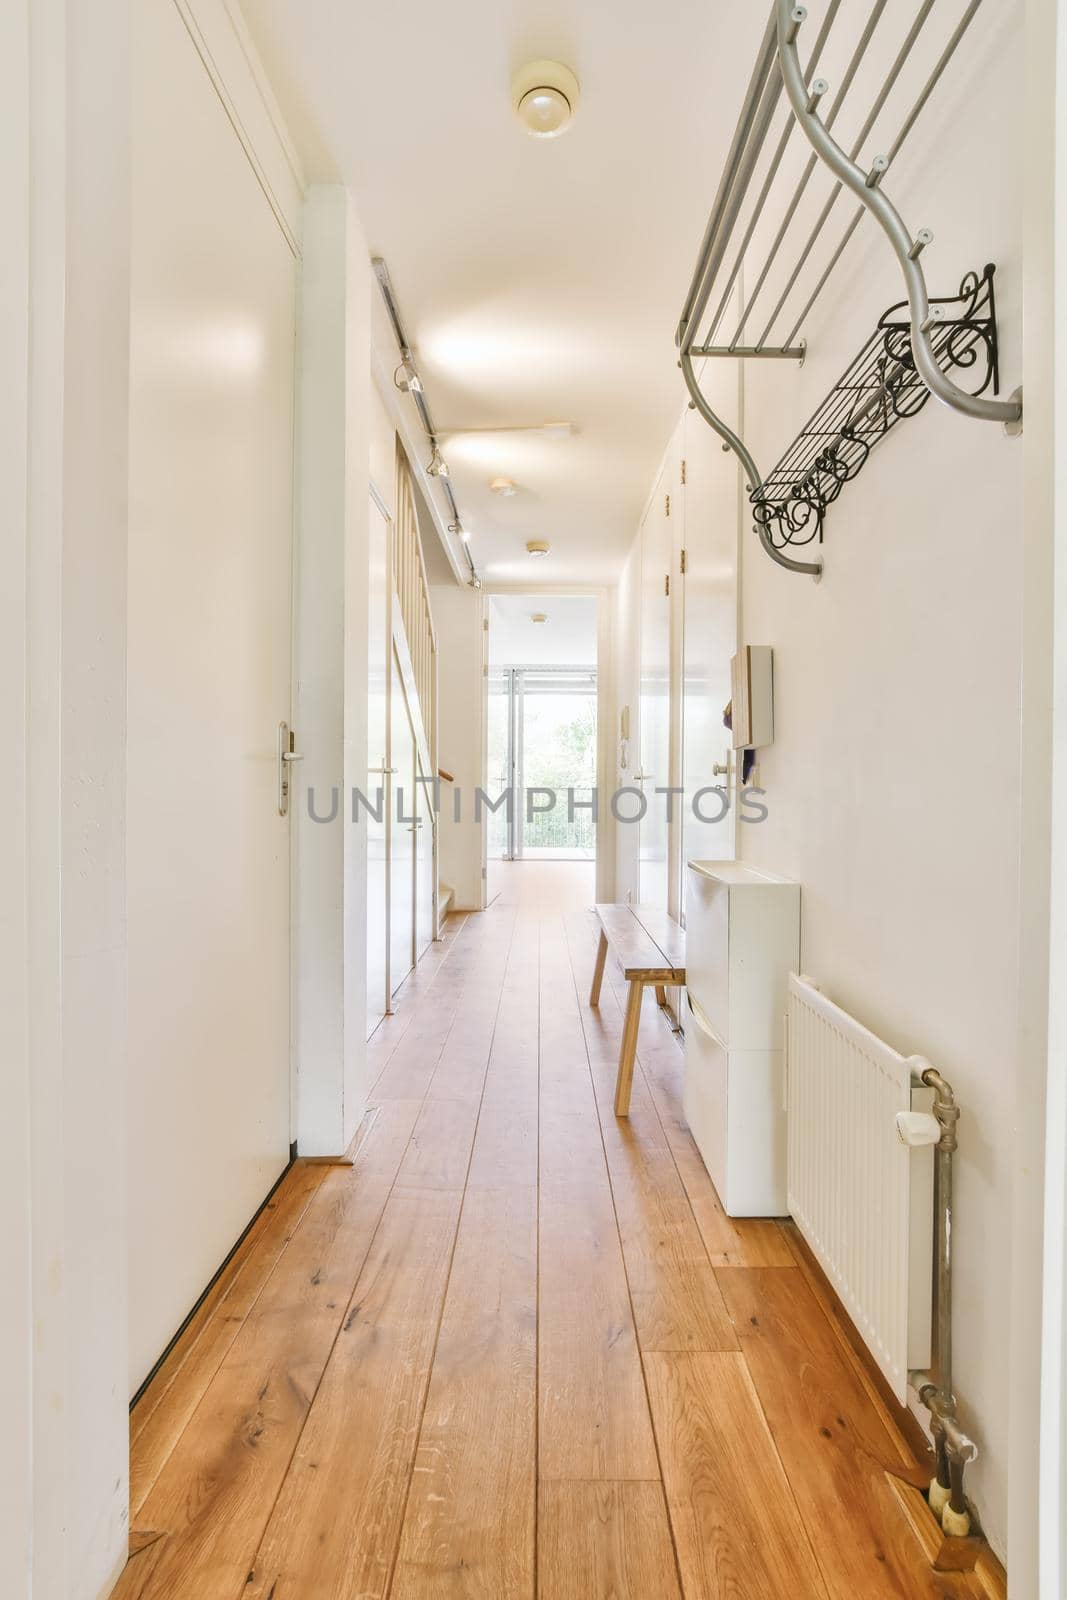 A long corridor with in modern apartment with wooden floor and white walls. Interior of contemporary flat in minimal style with spacious hallway with white walls